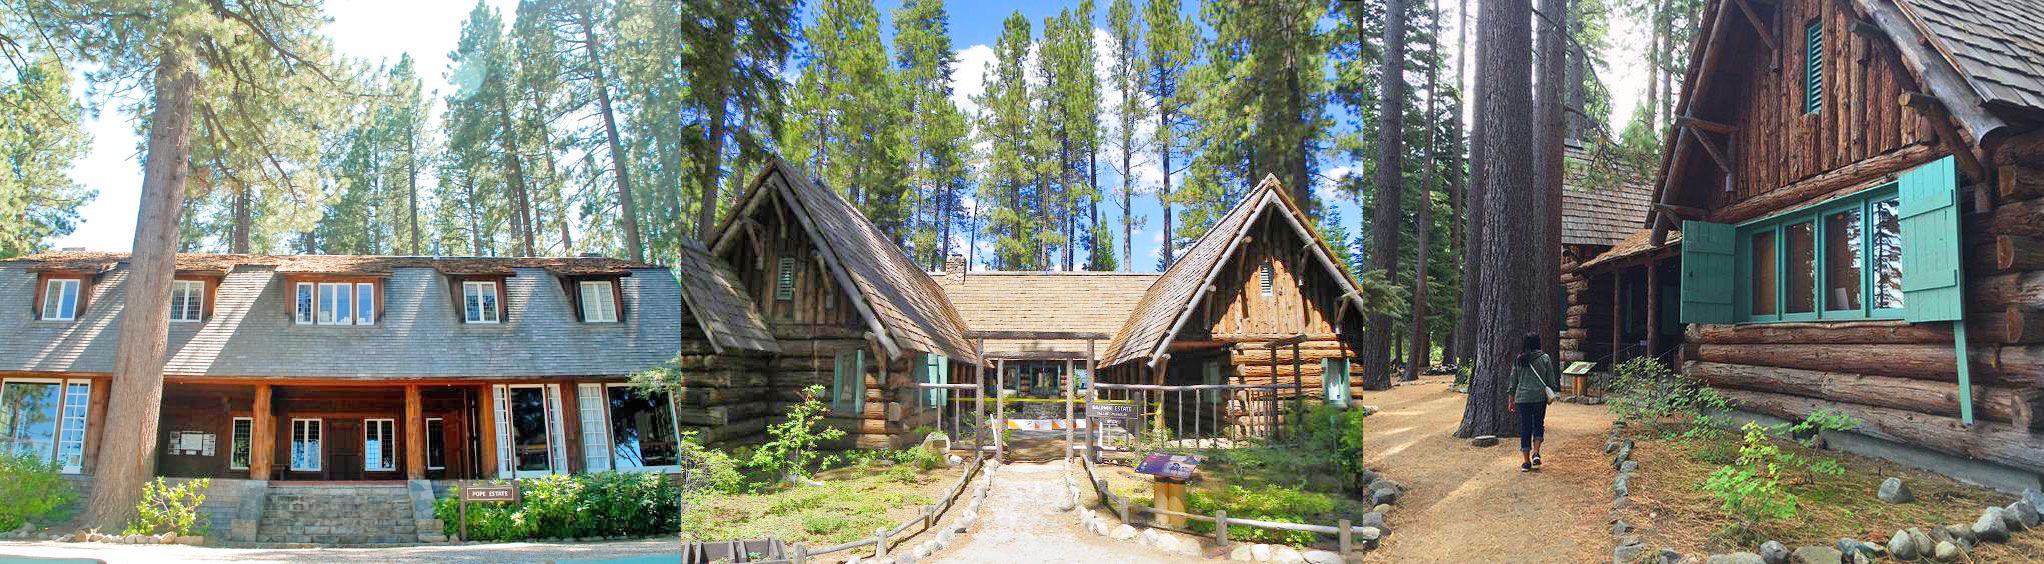 Tallac Historic Site in Lake Tahoe, CA